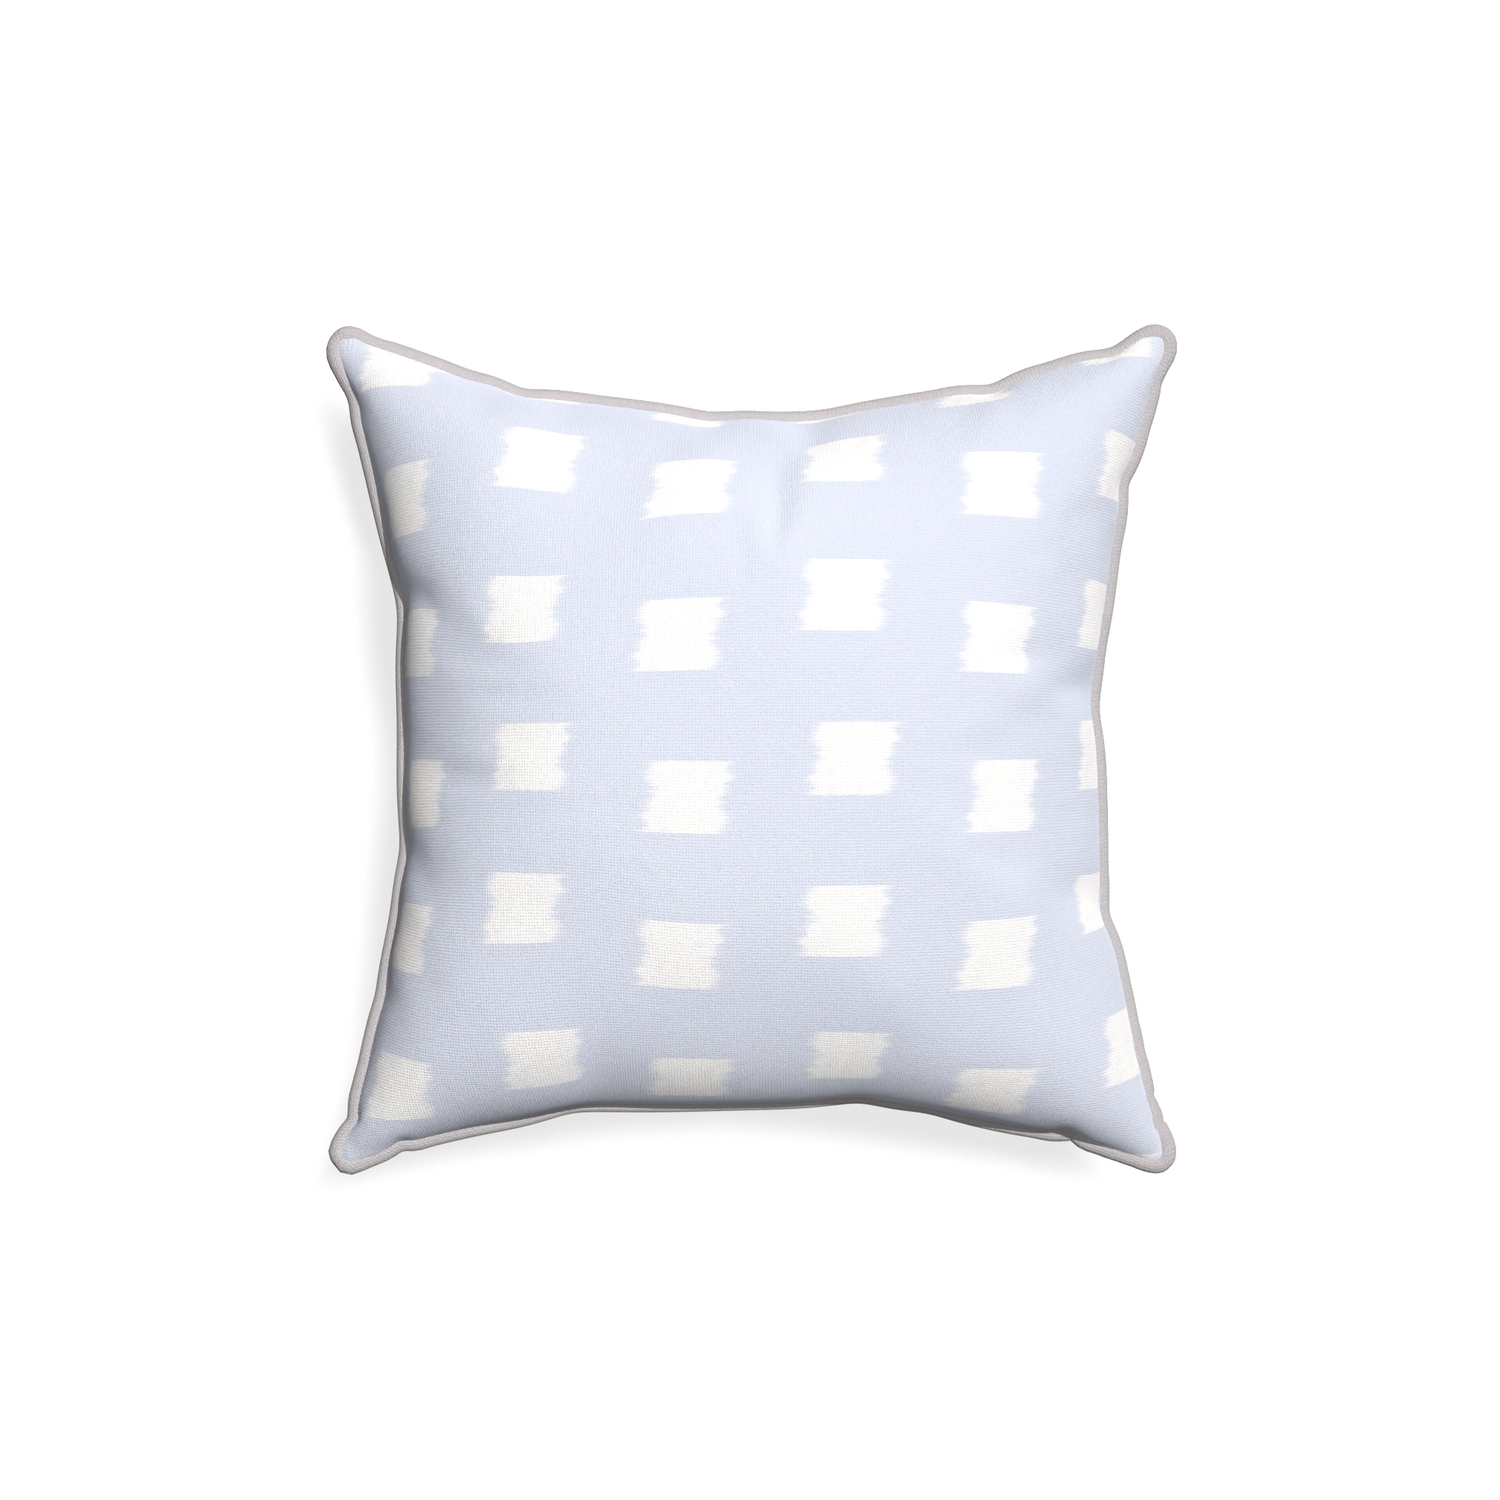 18-square denton custom sky blue patternpillow with pebble piping on white background